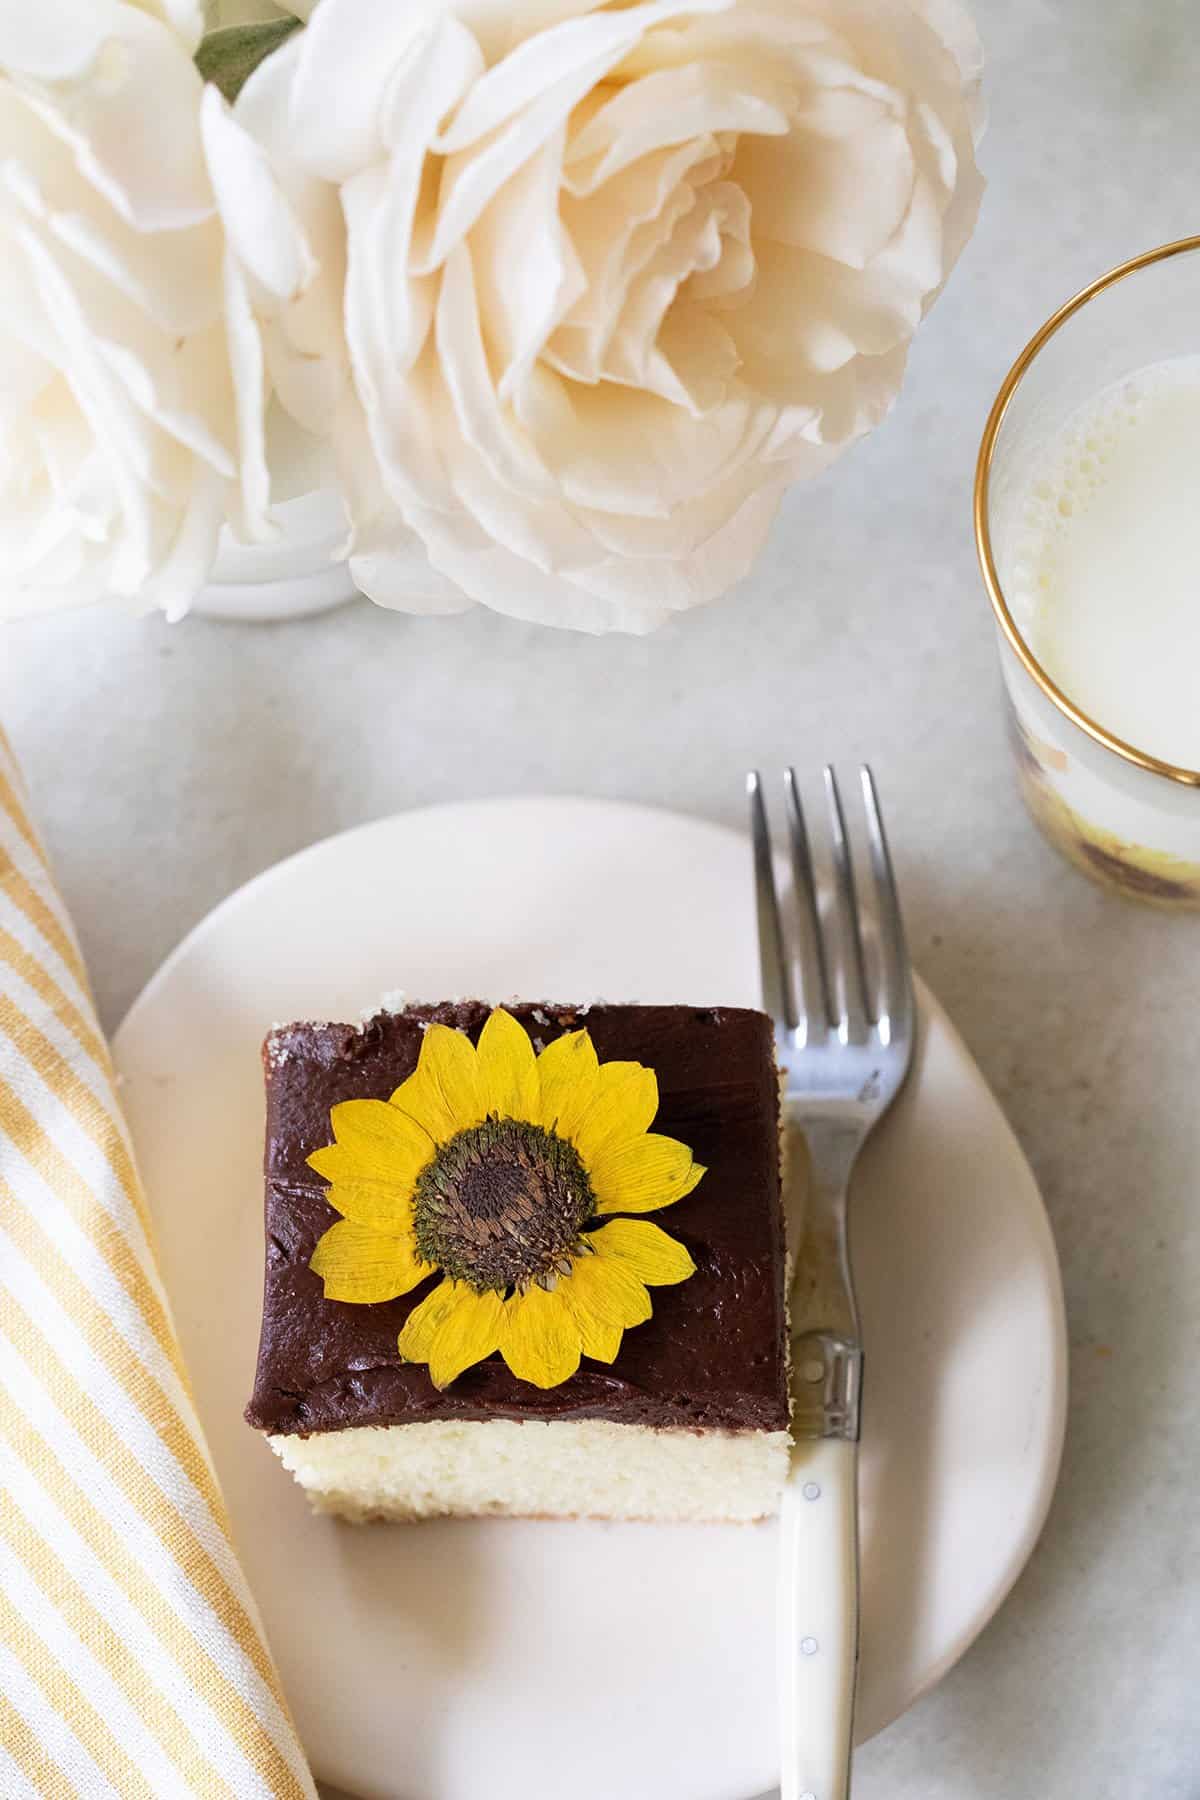 pretty slice of cake with frosting and en edible flower